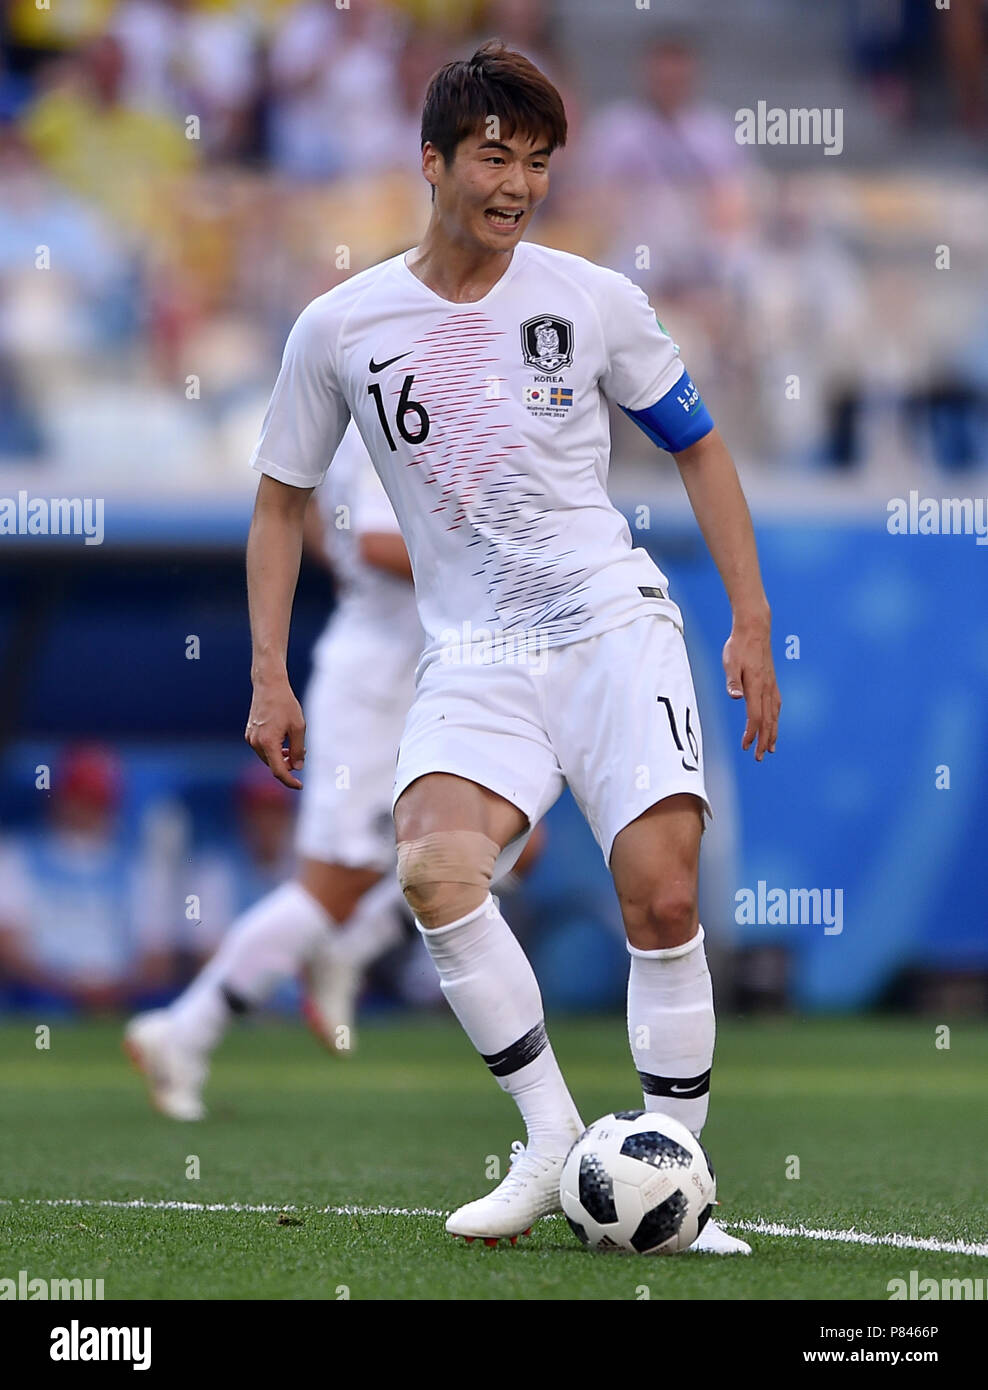 NIZHNIY NOVGOROD, RUSSIA - JUNE 18: Sungyueng Ki of Korea Republic in action during the 2018 FIFA World Cup Russia group F match between Sweden and Korea Republic at Nizhniy Novgorod Stadium on June 18, 2018 in Nizhniy Novgorod, Russia. (Photo by Lukasz Laskowski/PressFocus/MB Media) Stock Photo